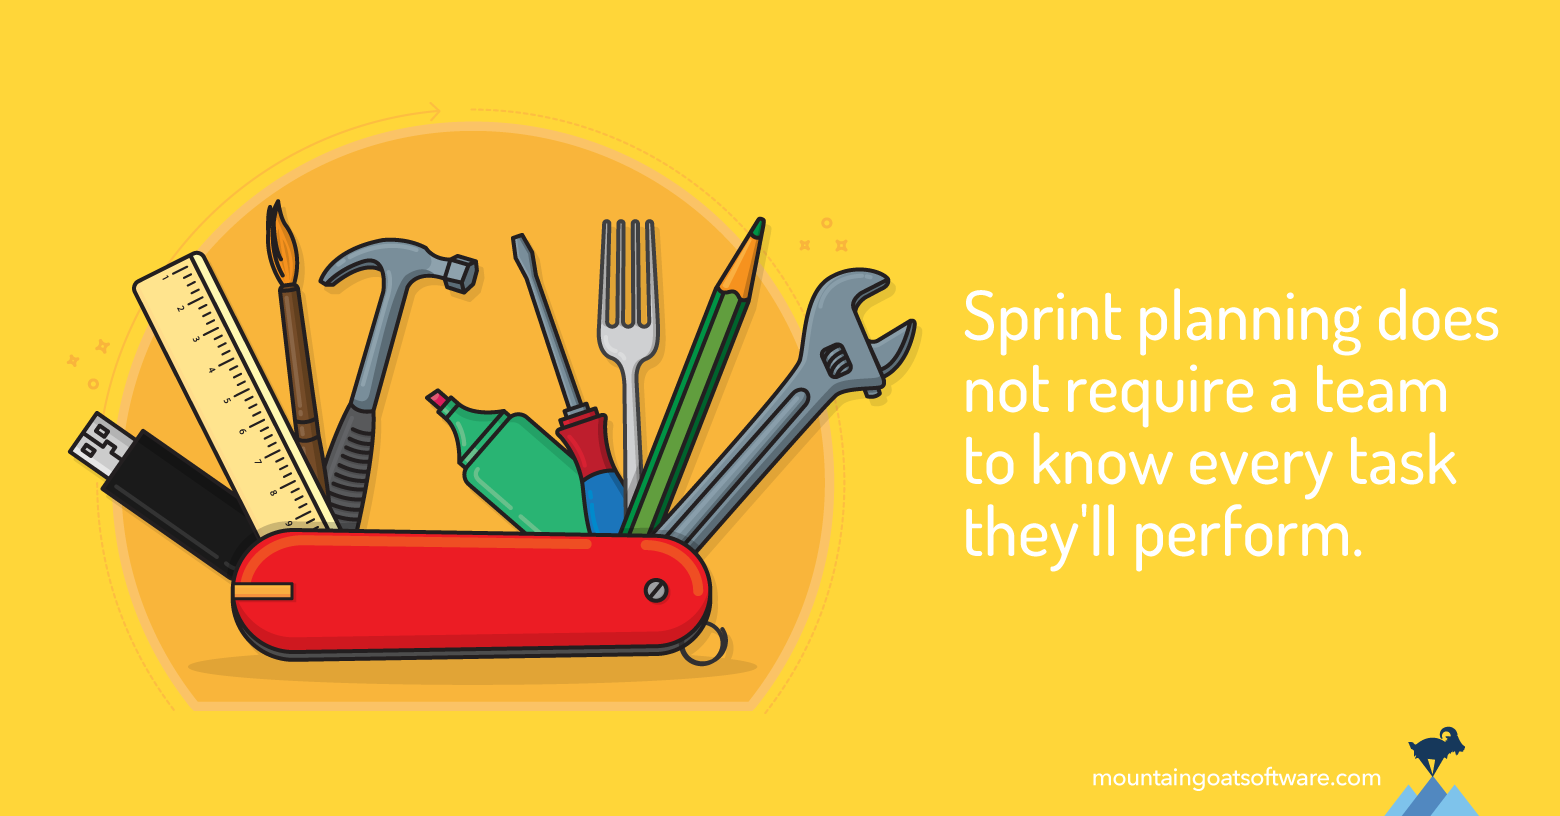 Teams Don’t Need to Think of Everything During Sprint Planning